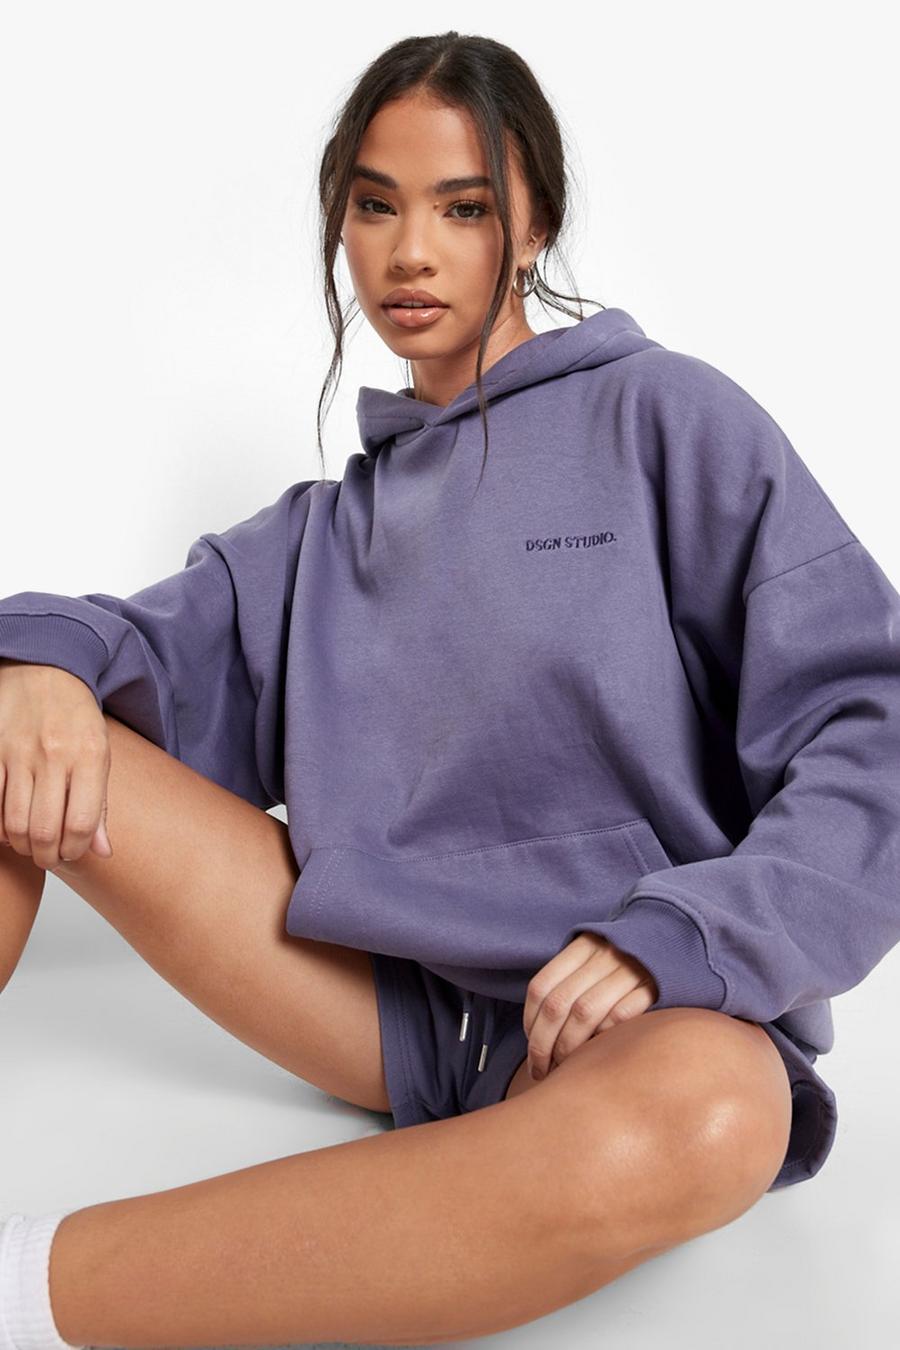 Bar Nathaniel Ward rangle Boohoo UK | Women's Blue Recycled Premium Oversized Hoodie | Pure Cotton  Striped Long Sleeve Rugby Shirt